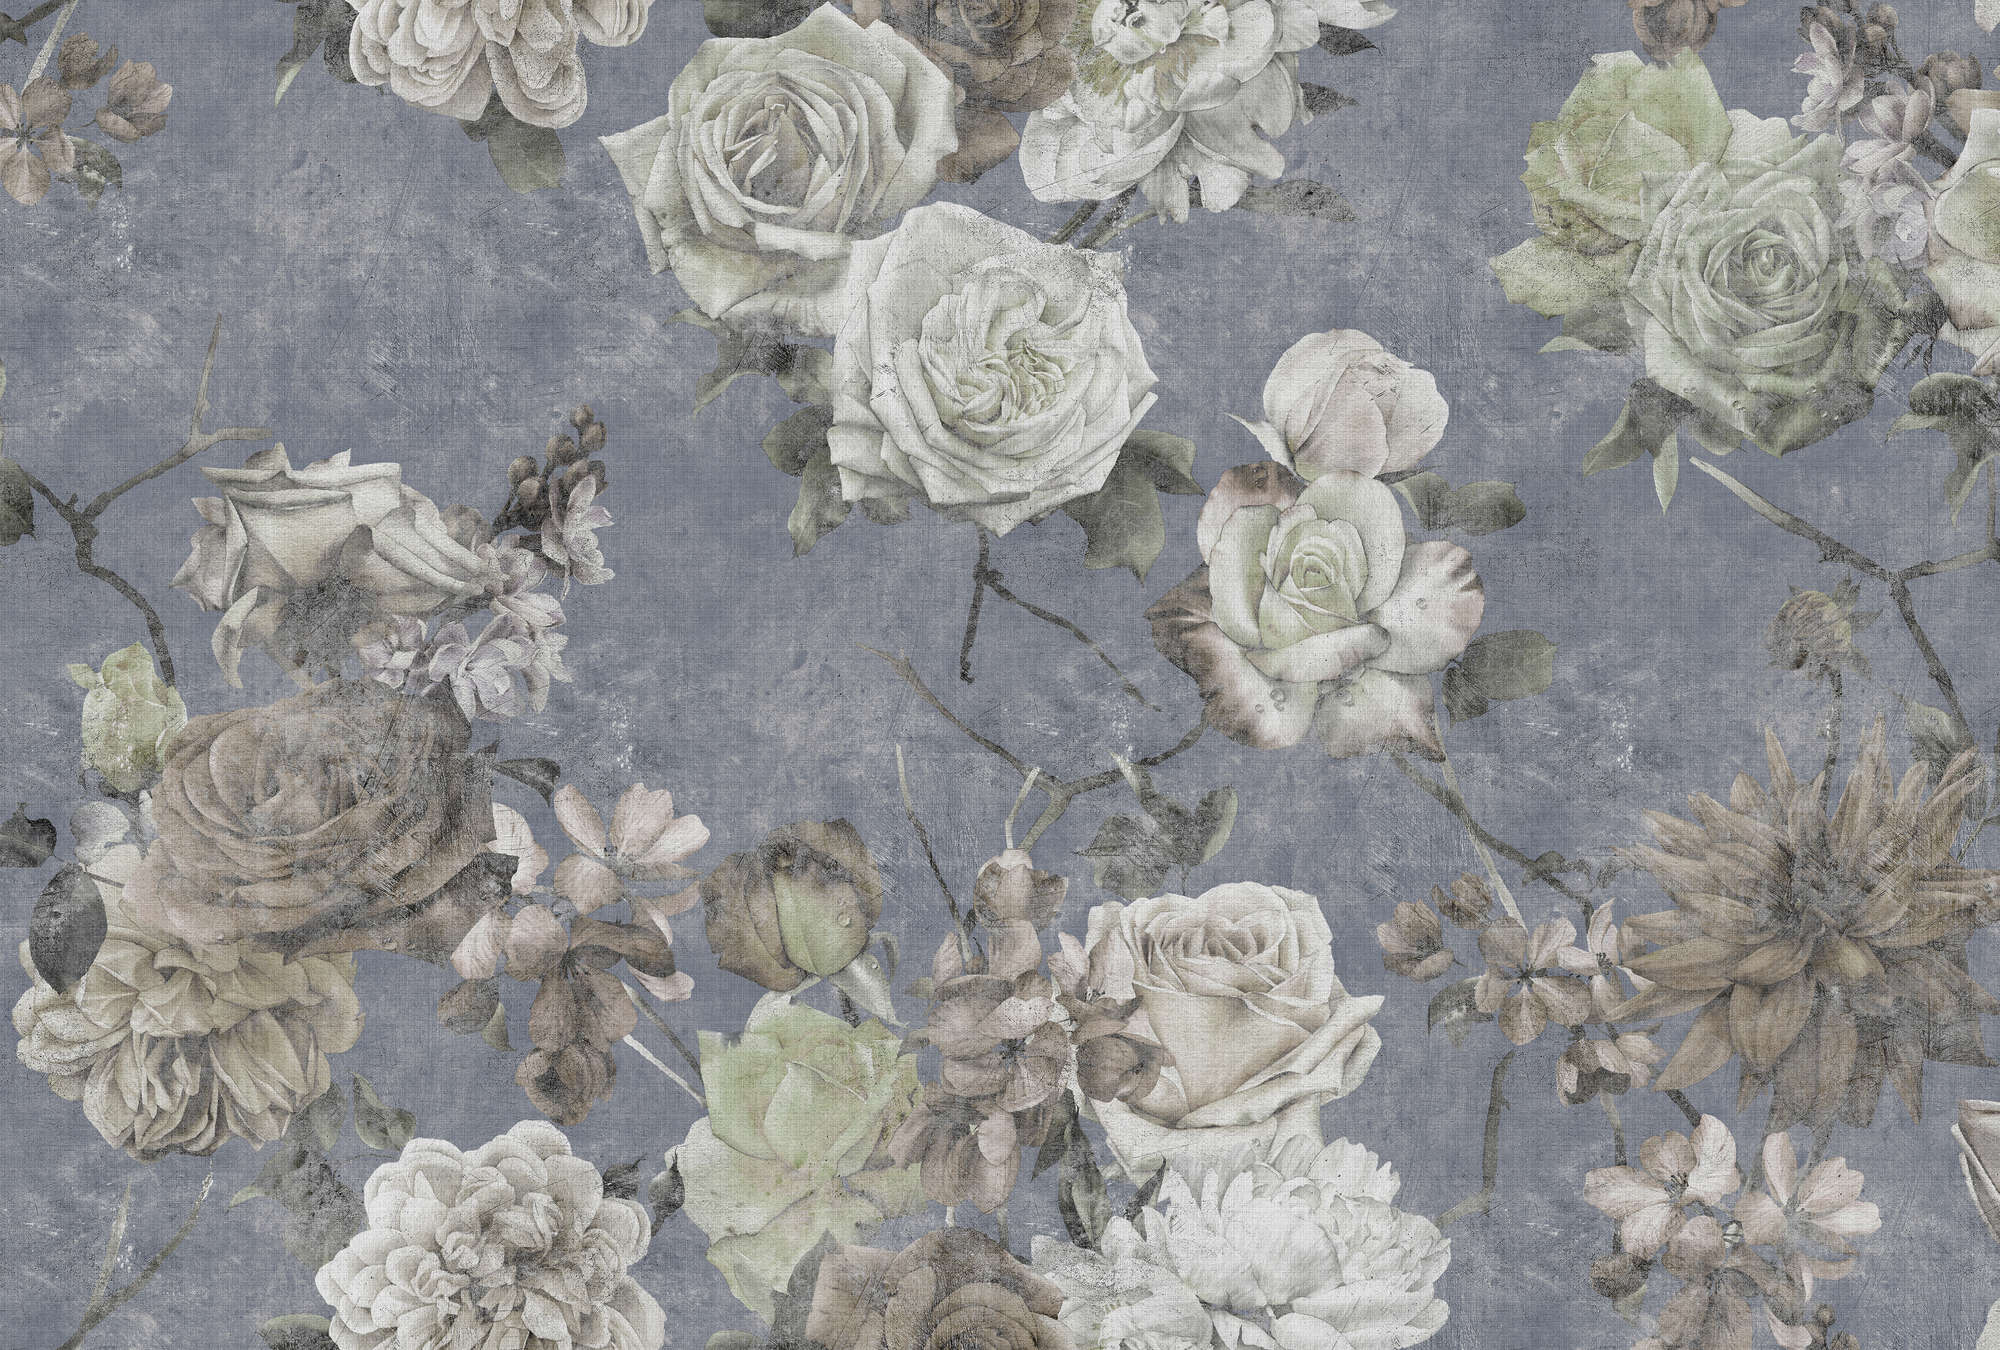             Sleeping Beauty 3 - Rose wallpaper in vintage used look - natural linen structure - blue, white | structure non-woven
        